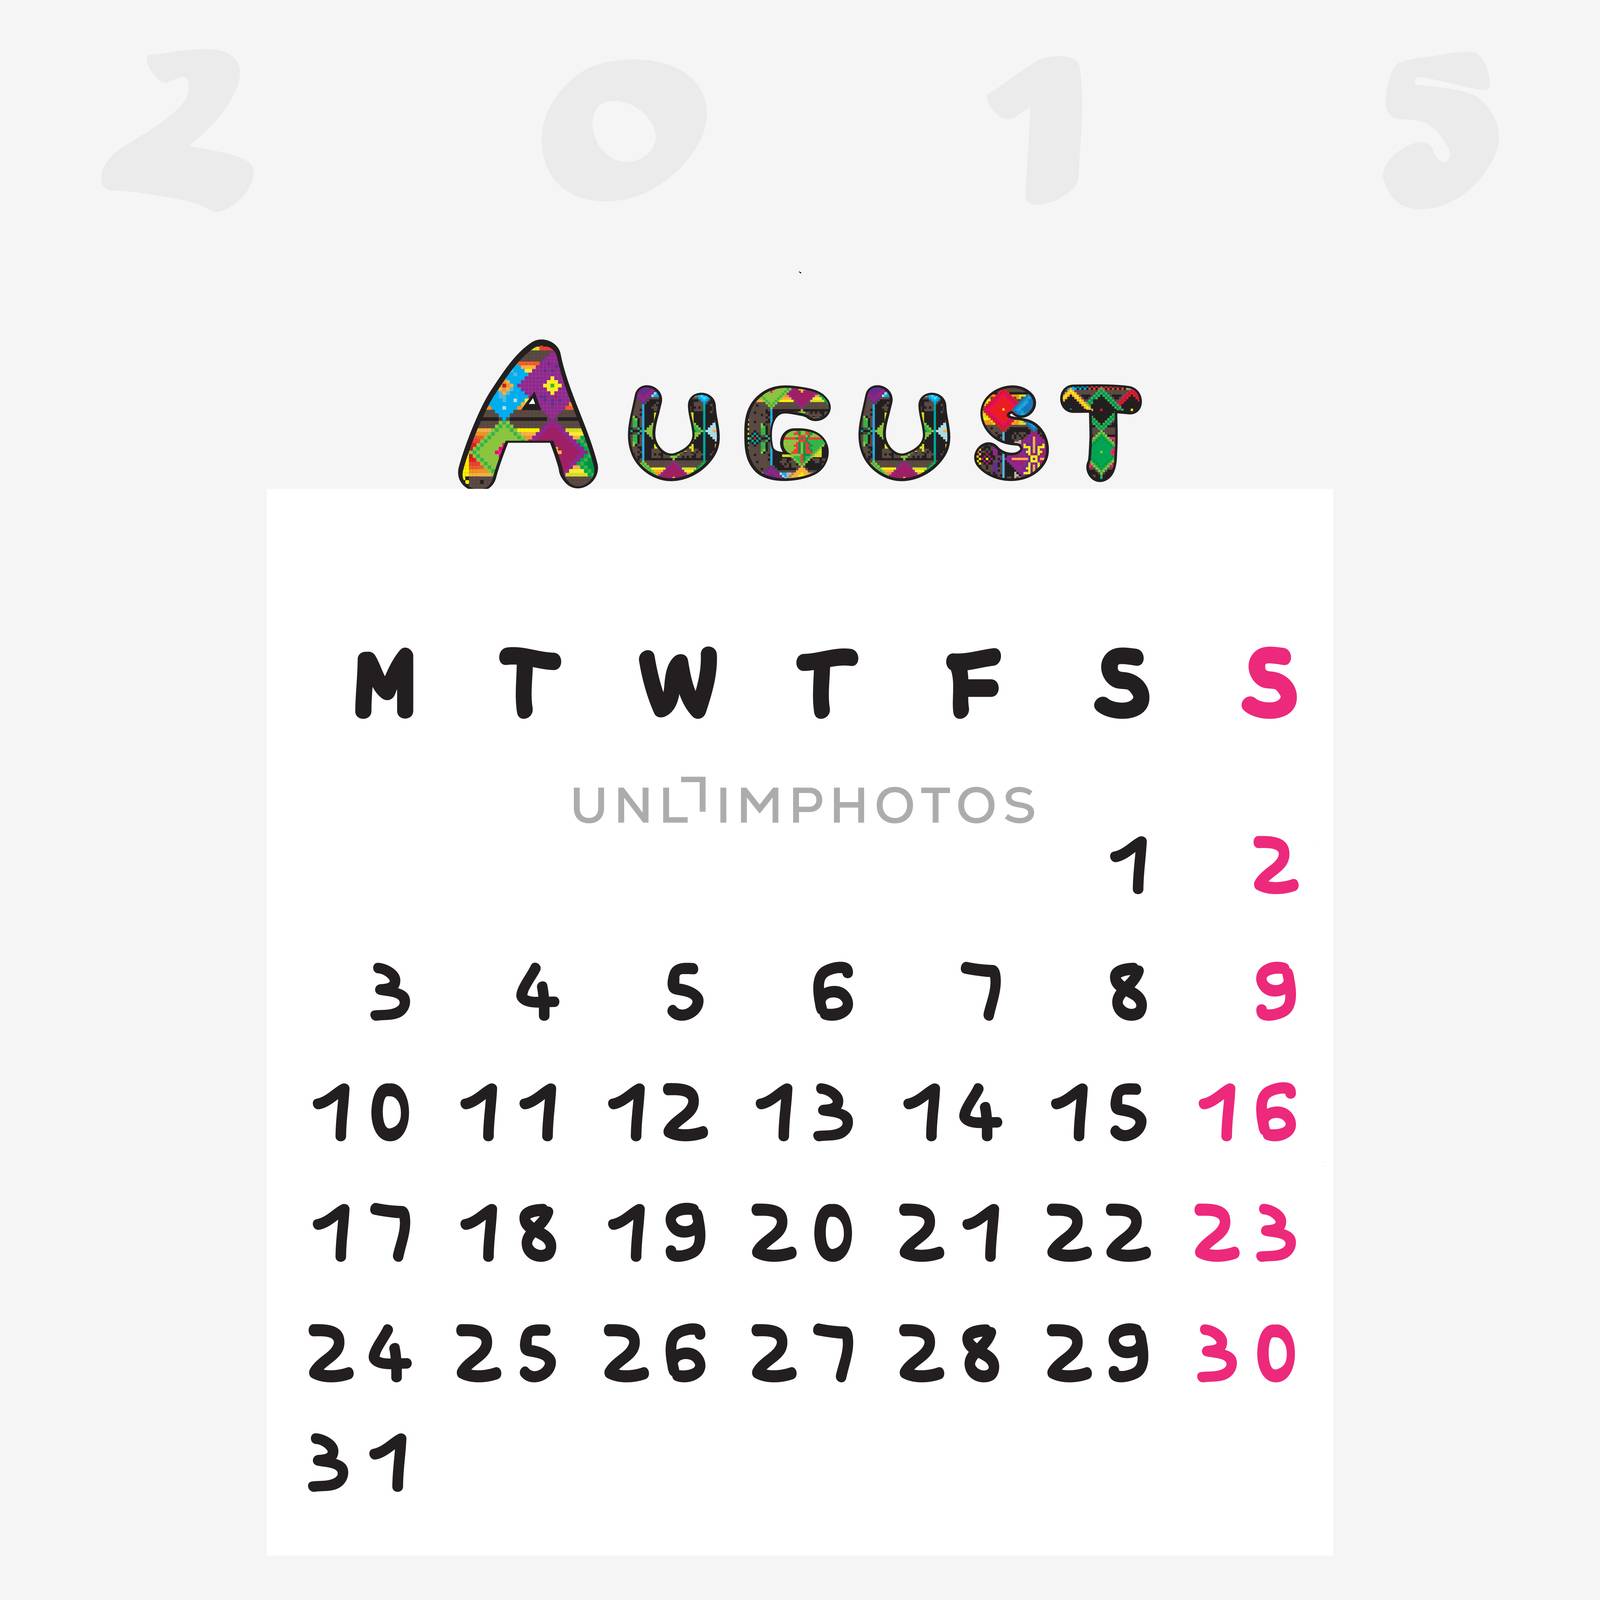 Calendar 2015, graphic illustration of August monthly calendar with original hand drawn text and colored capital letters for kids